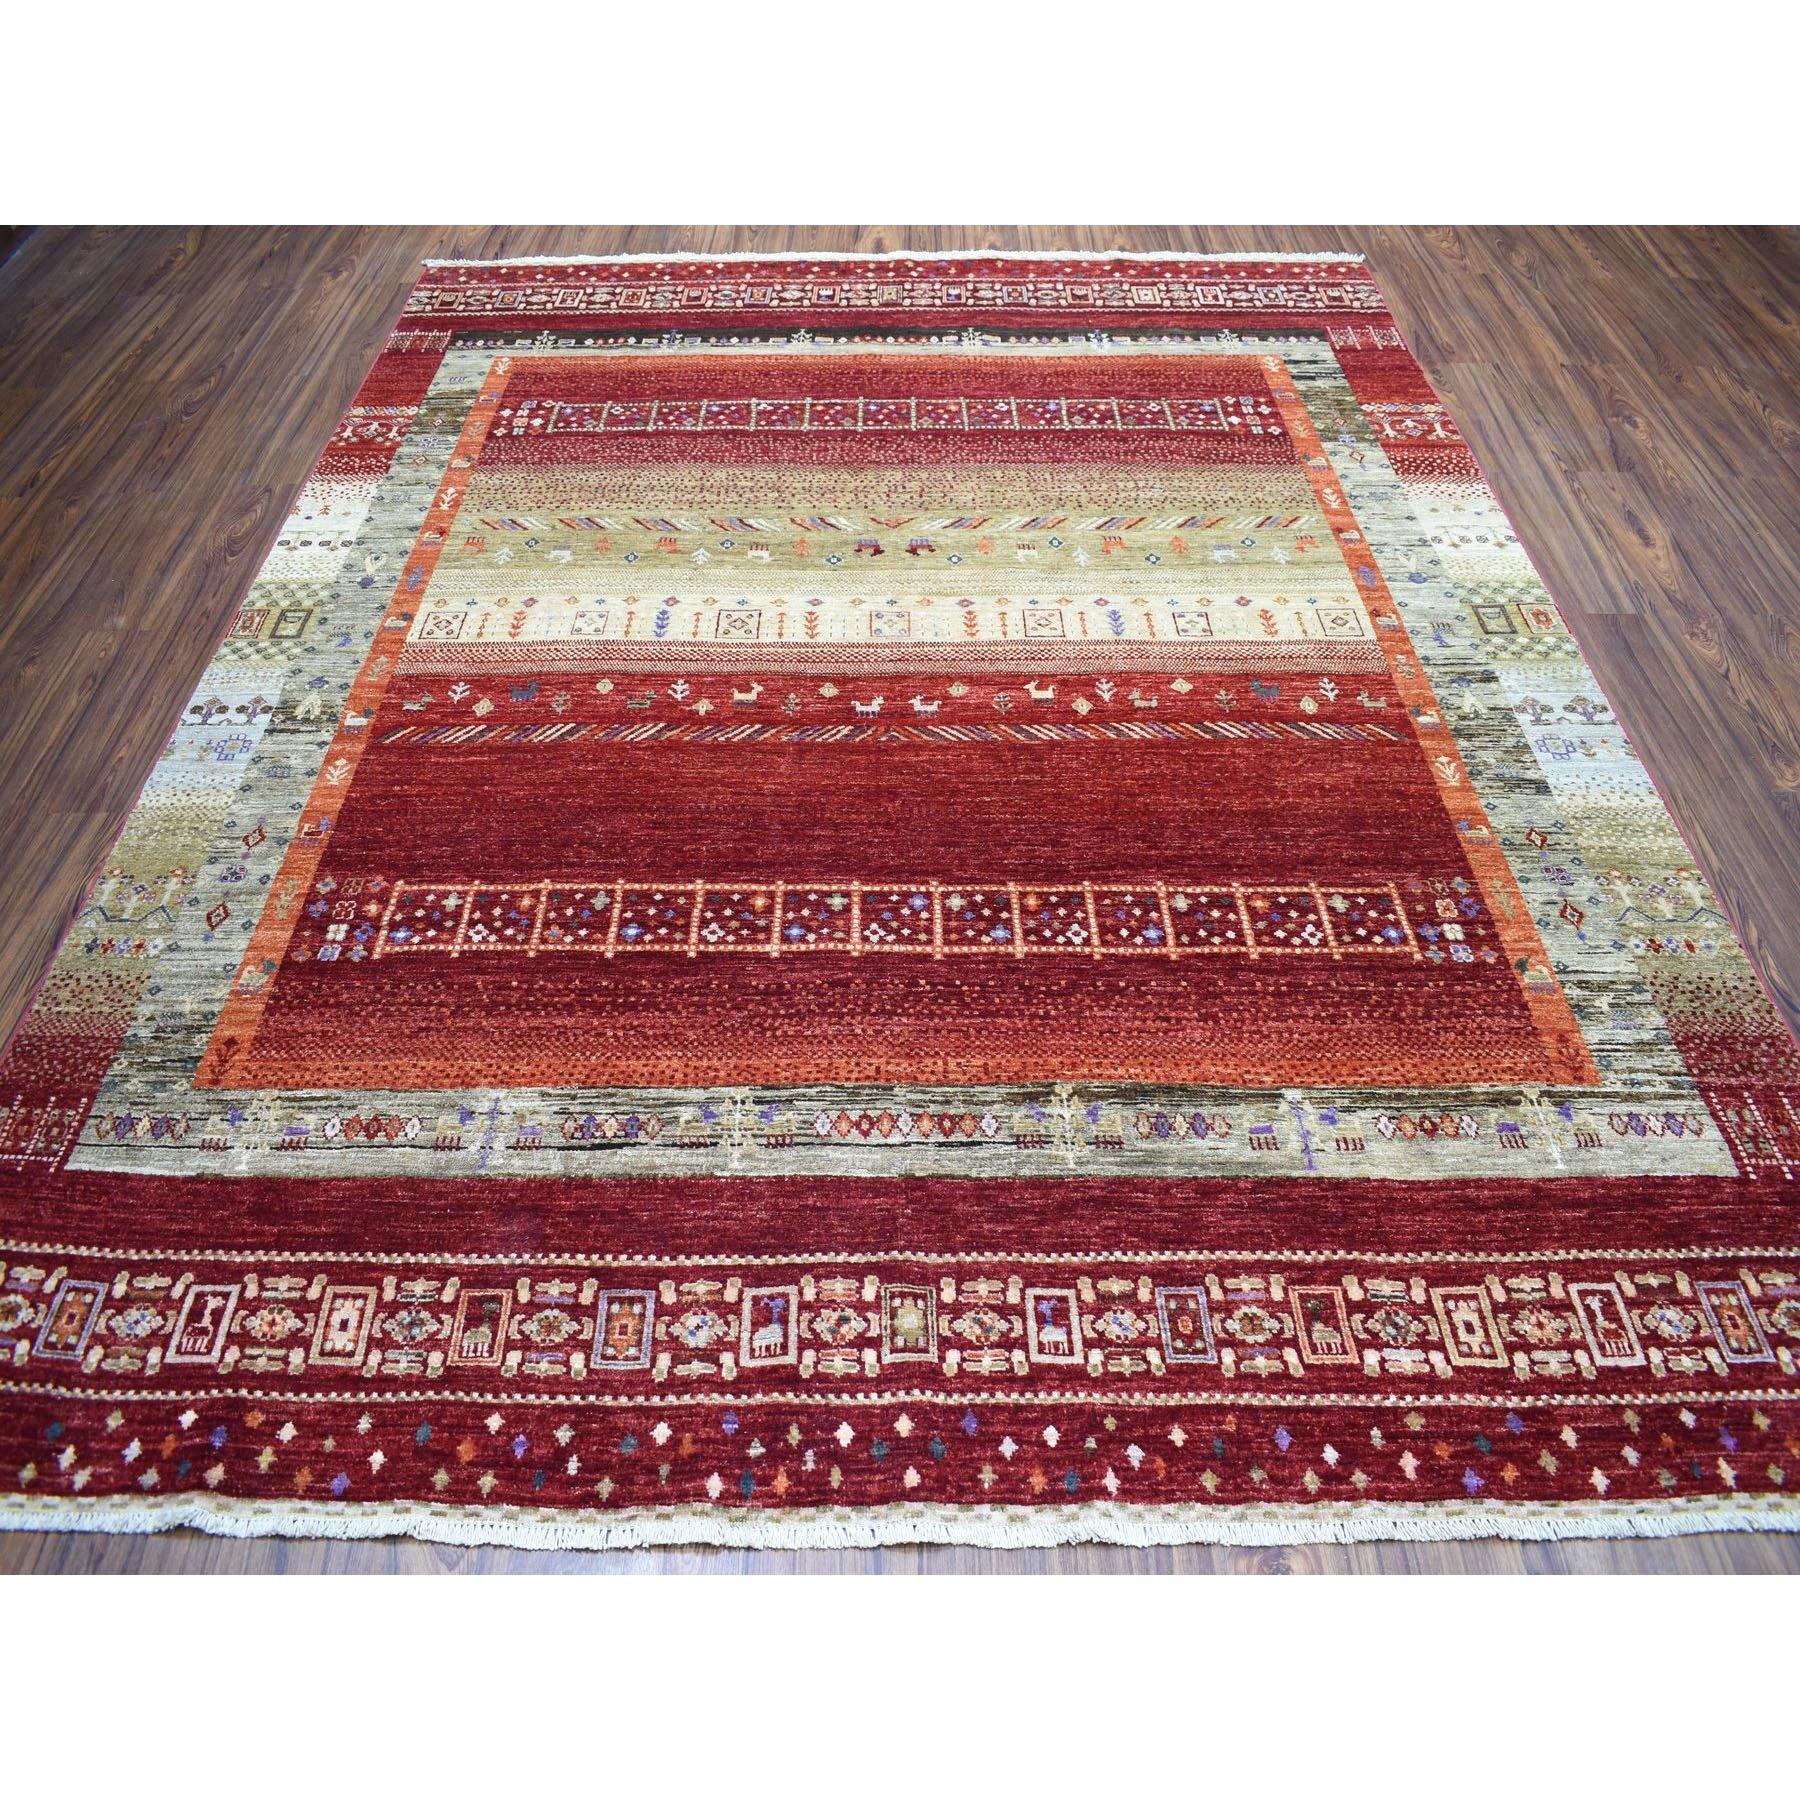 Other Red Kashkuli Gabbeh Pictorial Pure Wool Hand Knotted Oriental Rug